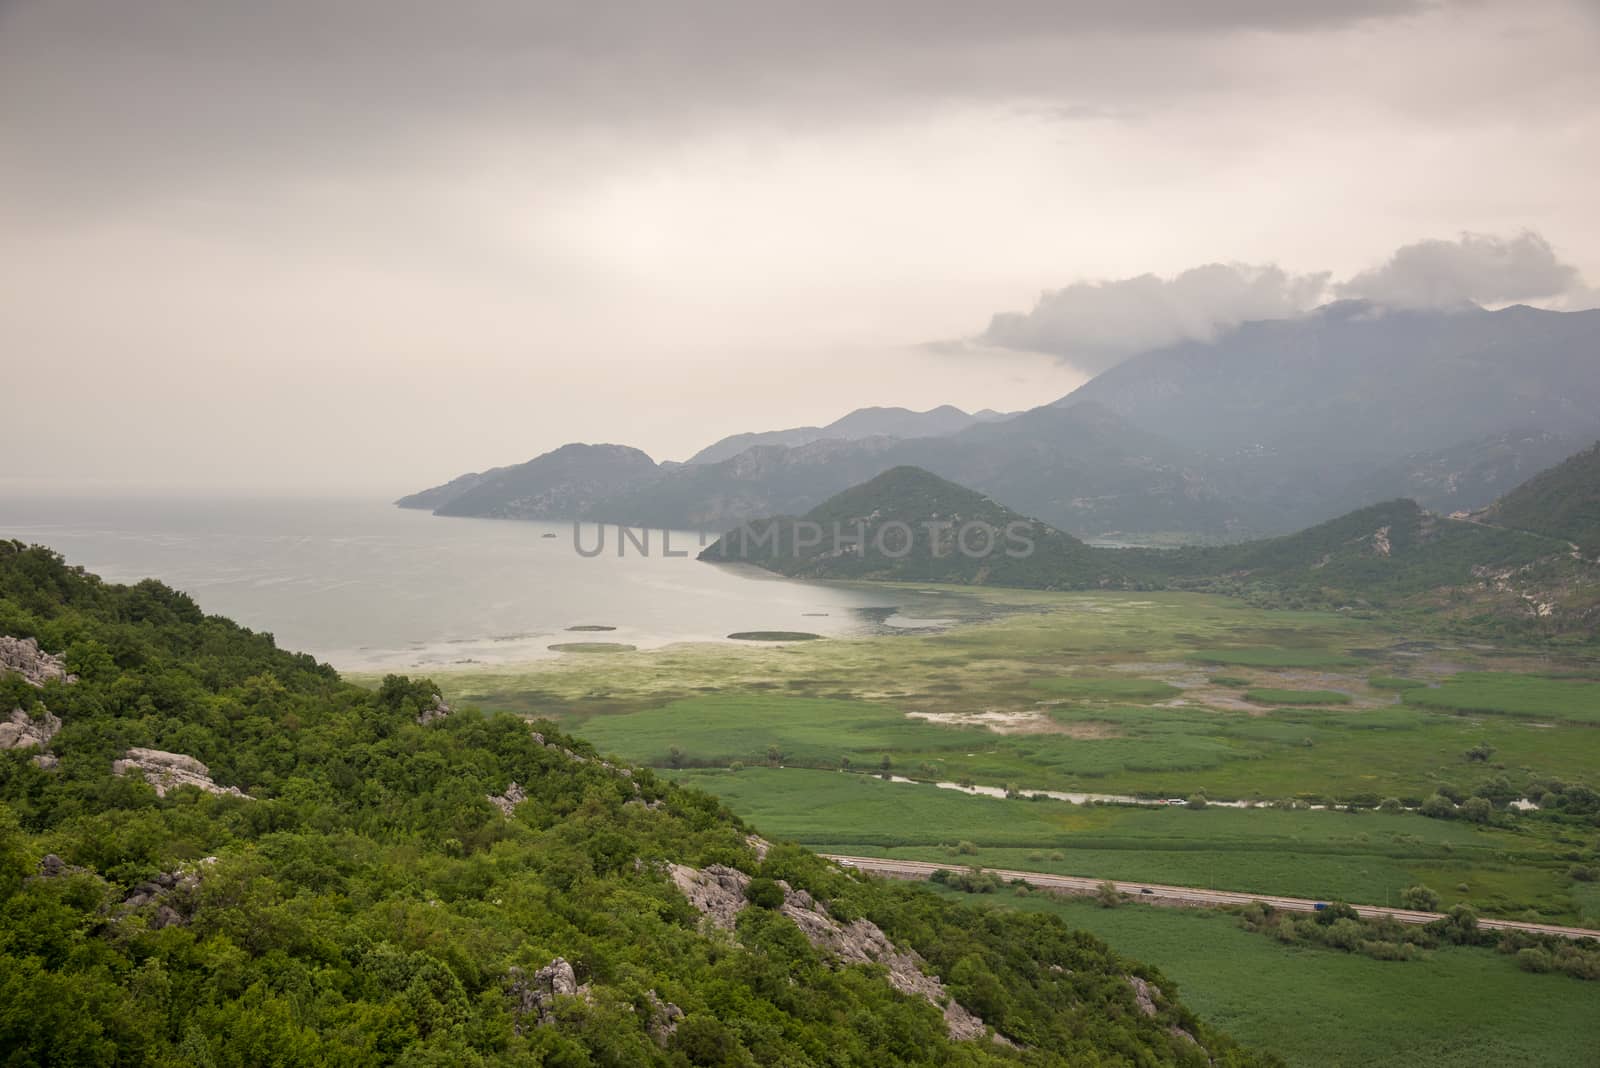 Lake Shkod also called Scutari, Skadar and Shkodra lies on the border of Albania and Montenegro, the largest lake in the Southern Europe